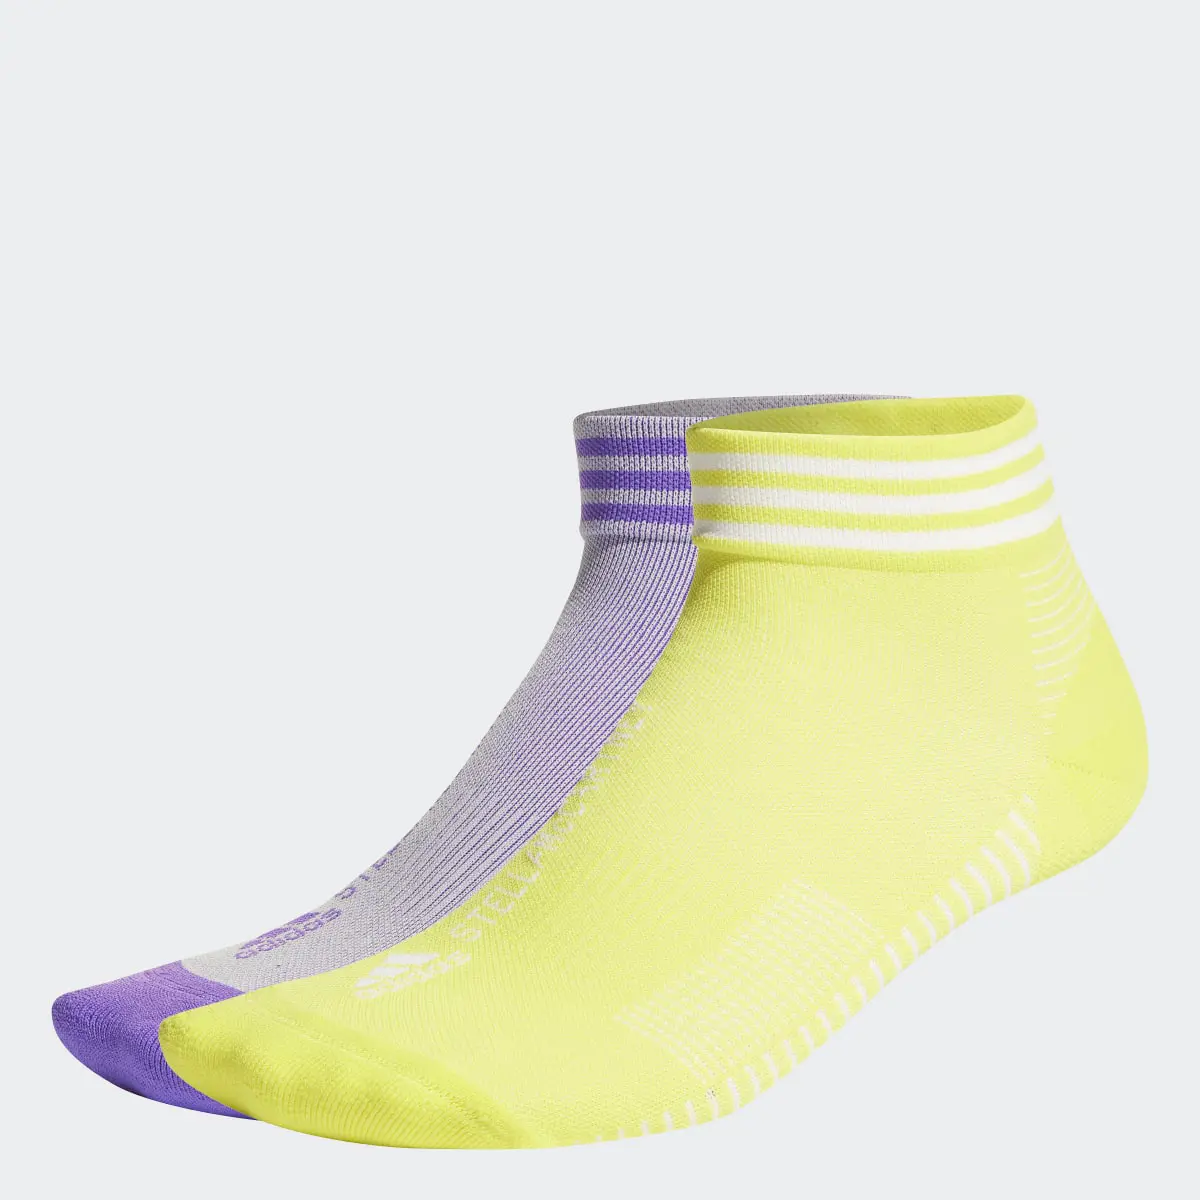 Adidas Chaussettes basses adidas by Stella McCartney (2 paires). 1